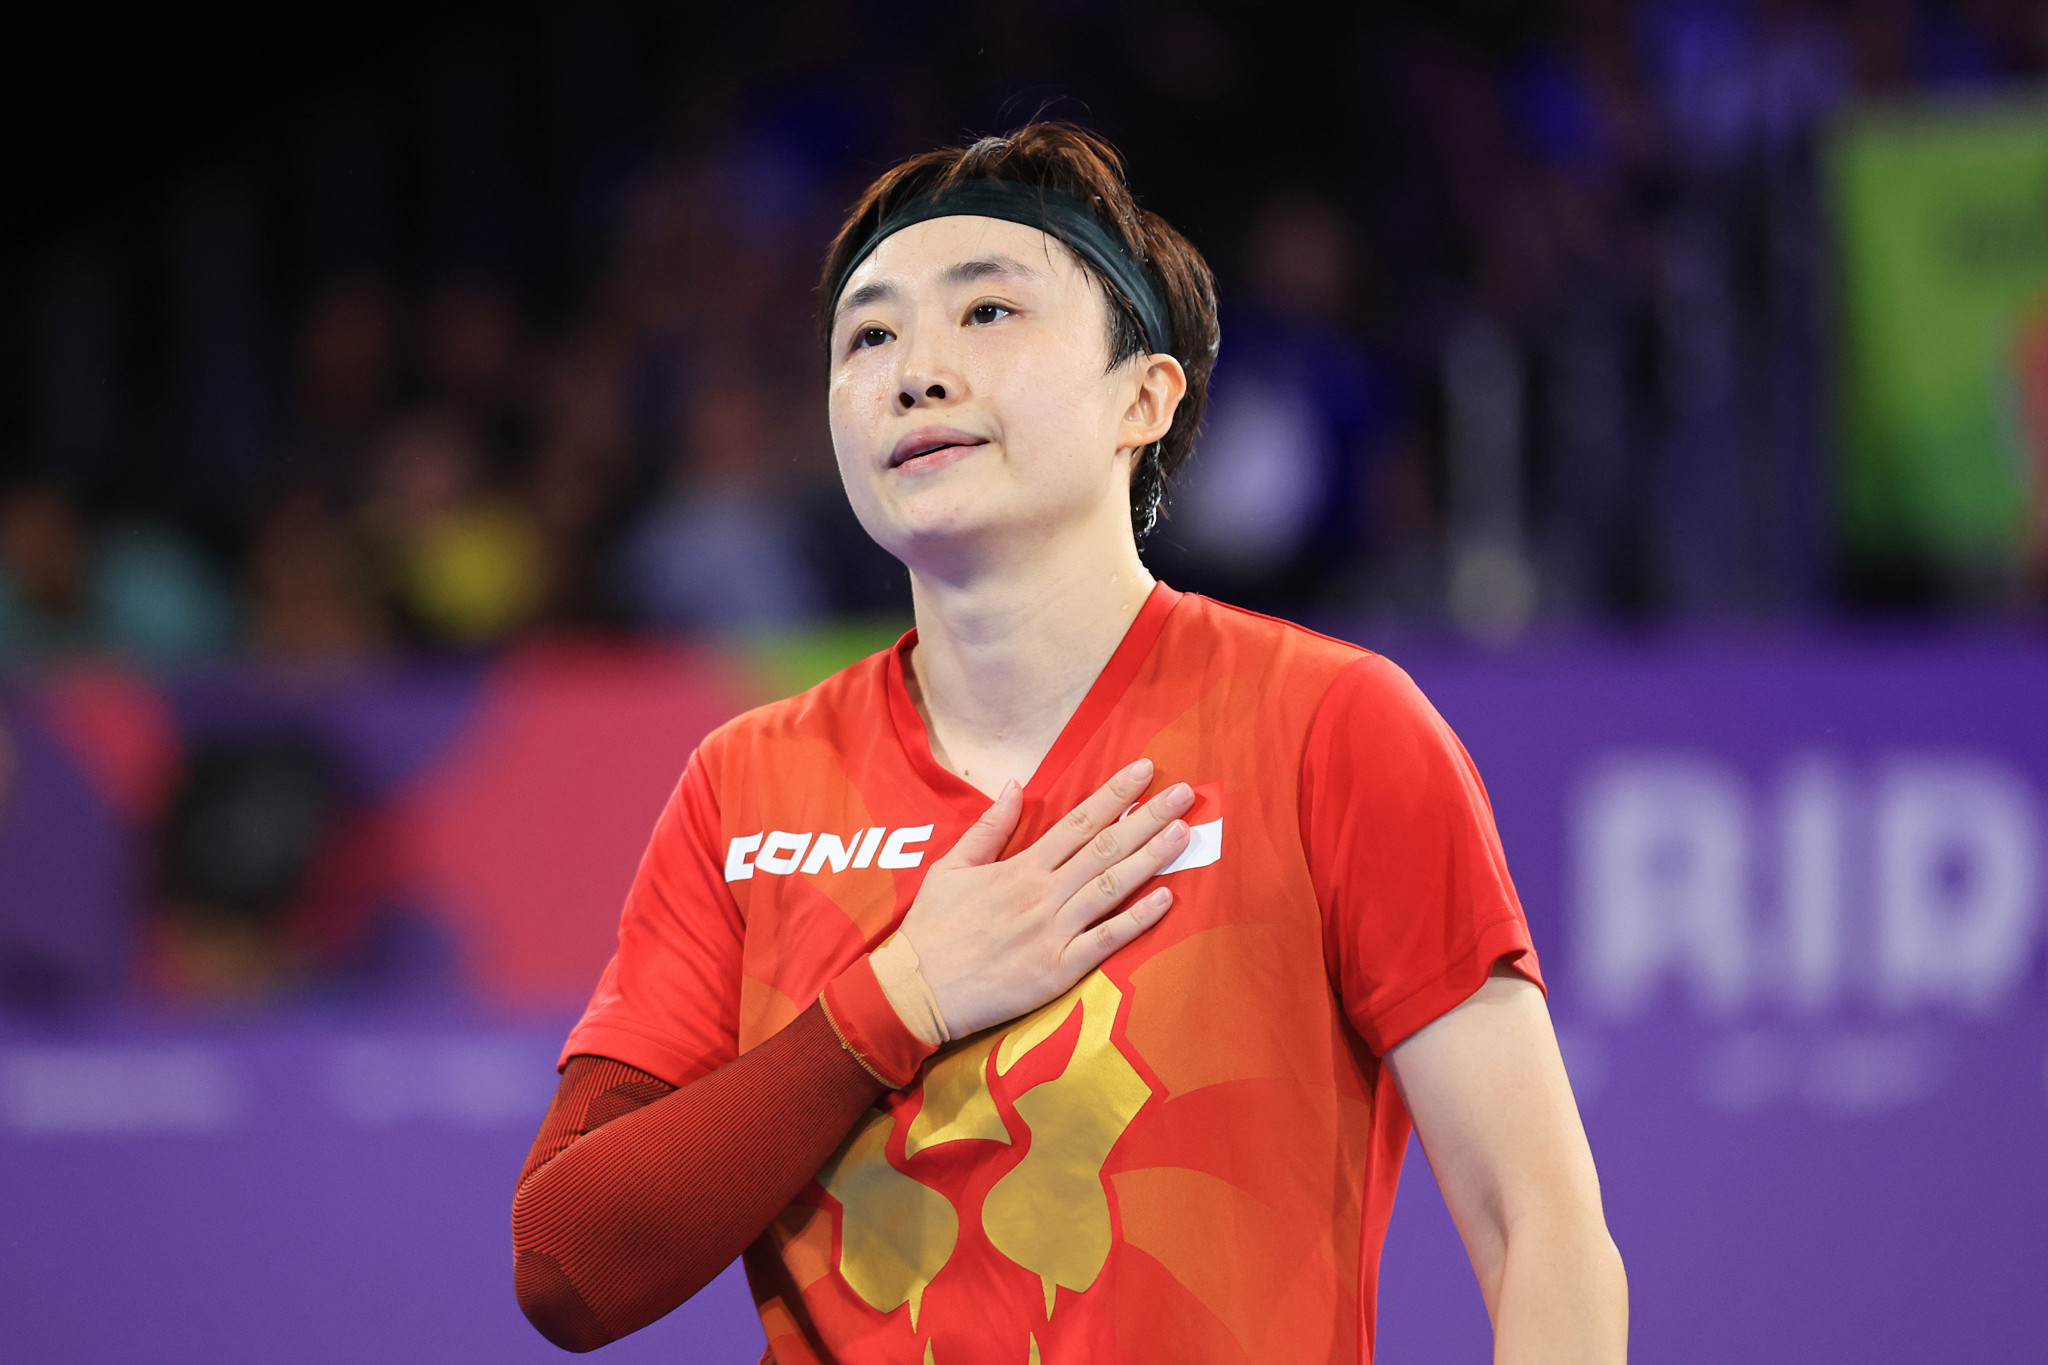 Feng Tianwei won three of Singapore's gold medals at Birmingham 2022 ©Getty Images